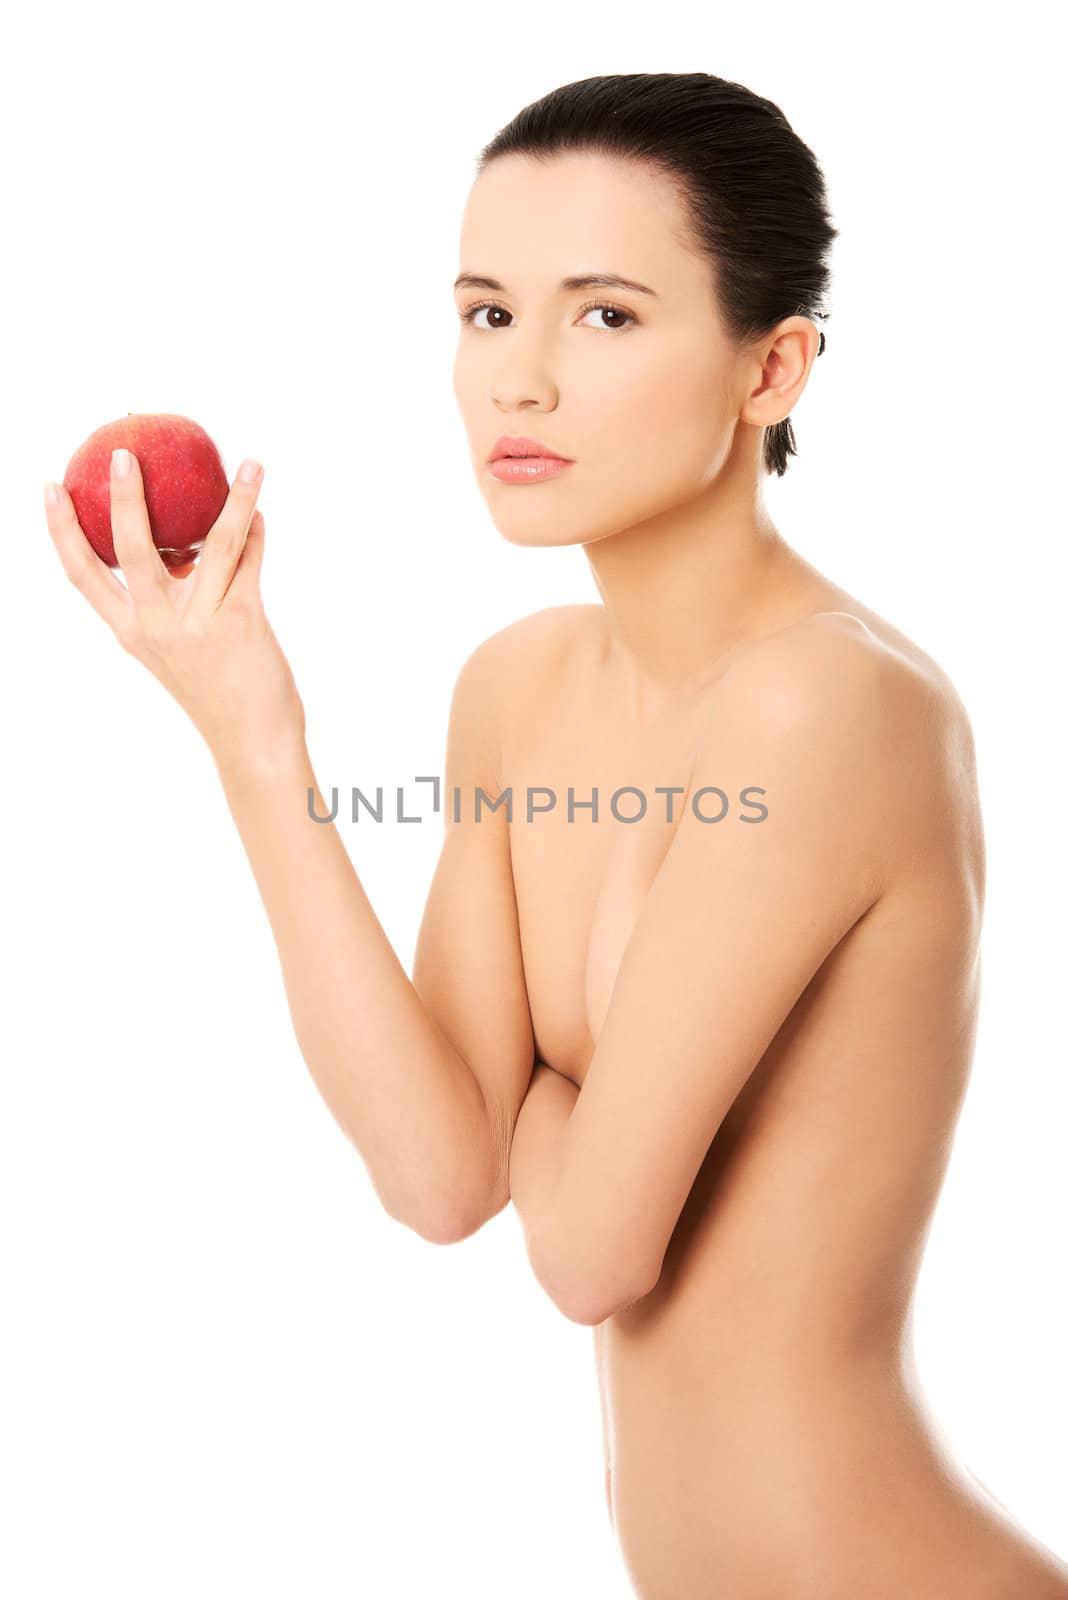 Beautiful woman with clean fresh healthy skin holding red apple. Isolated on white